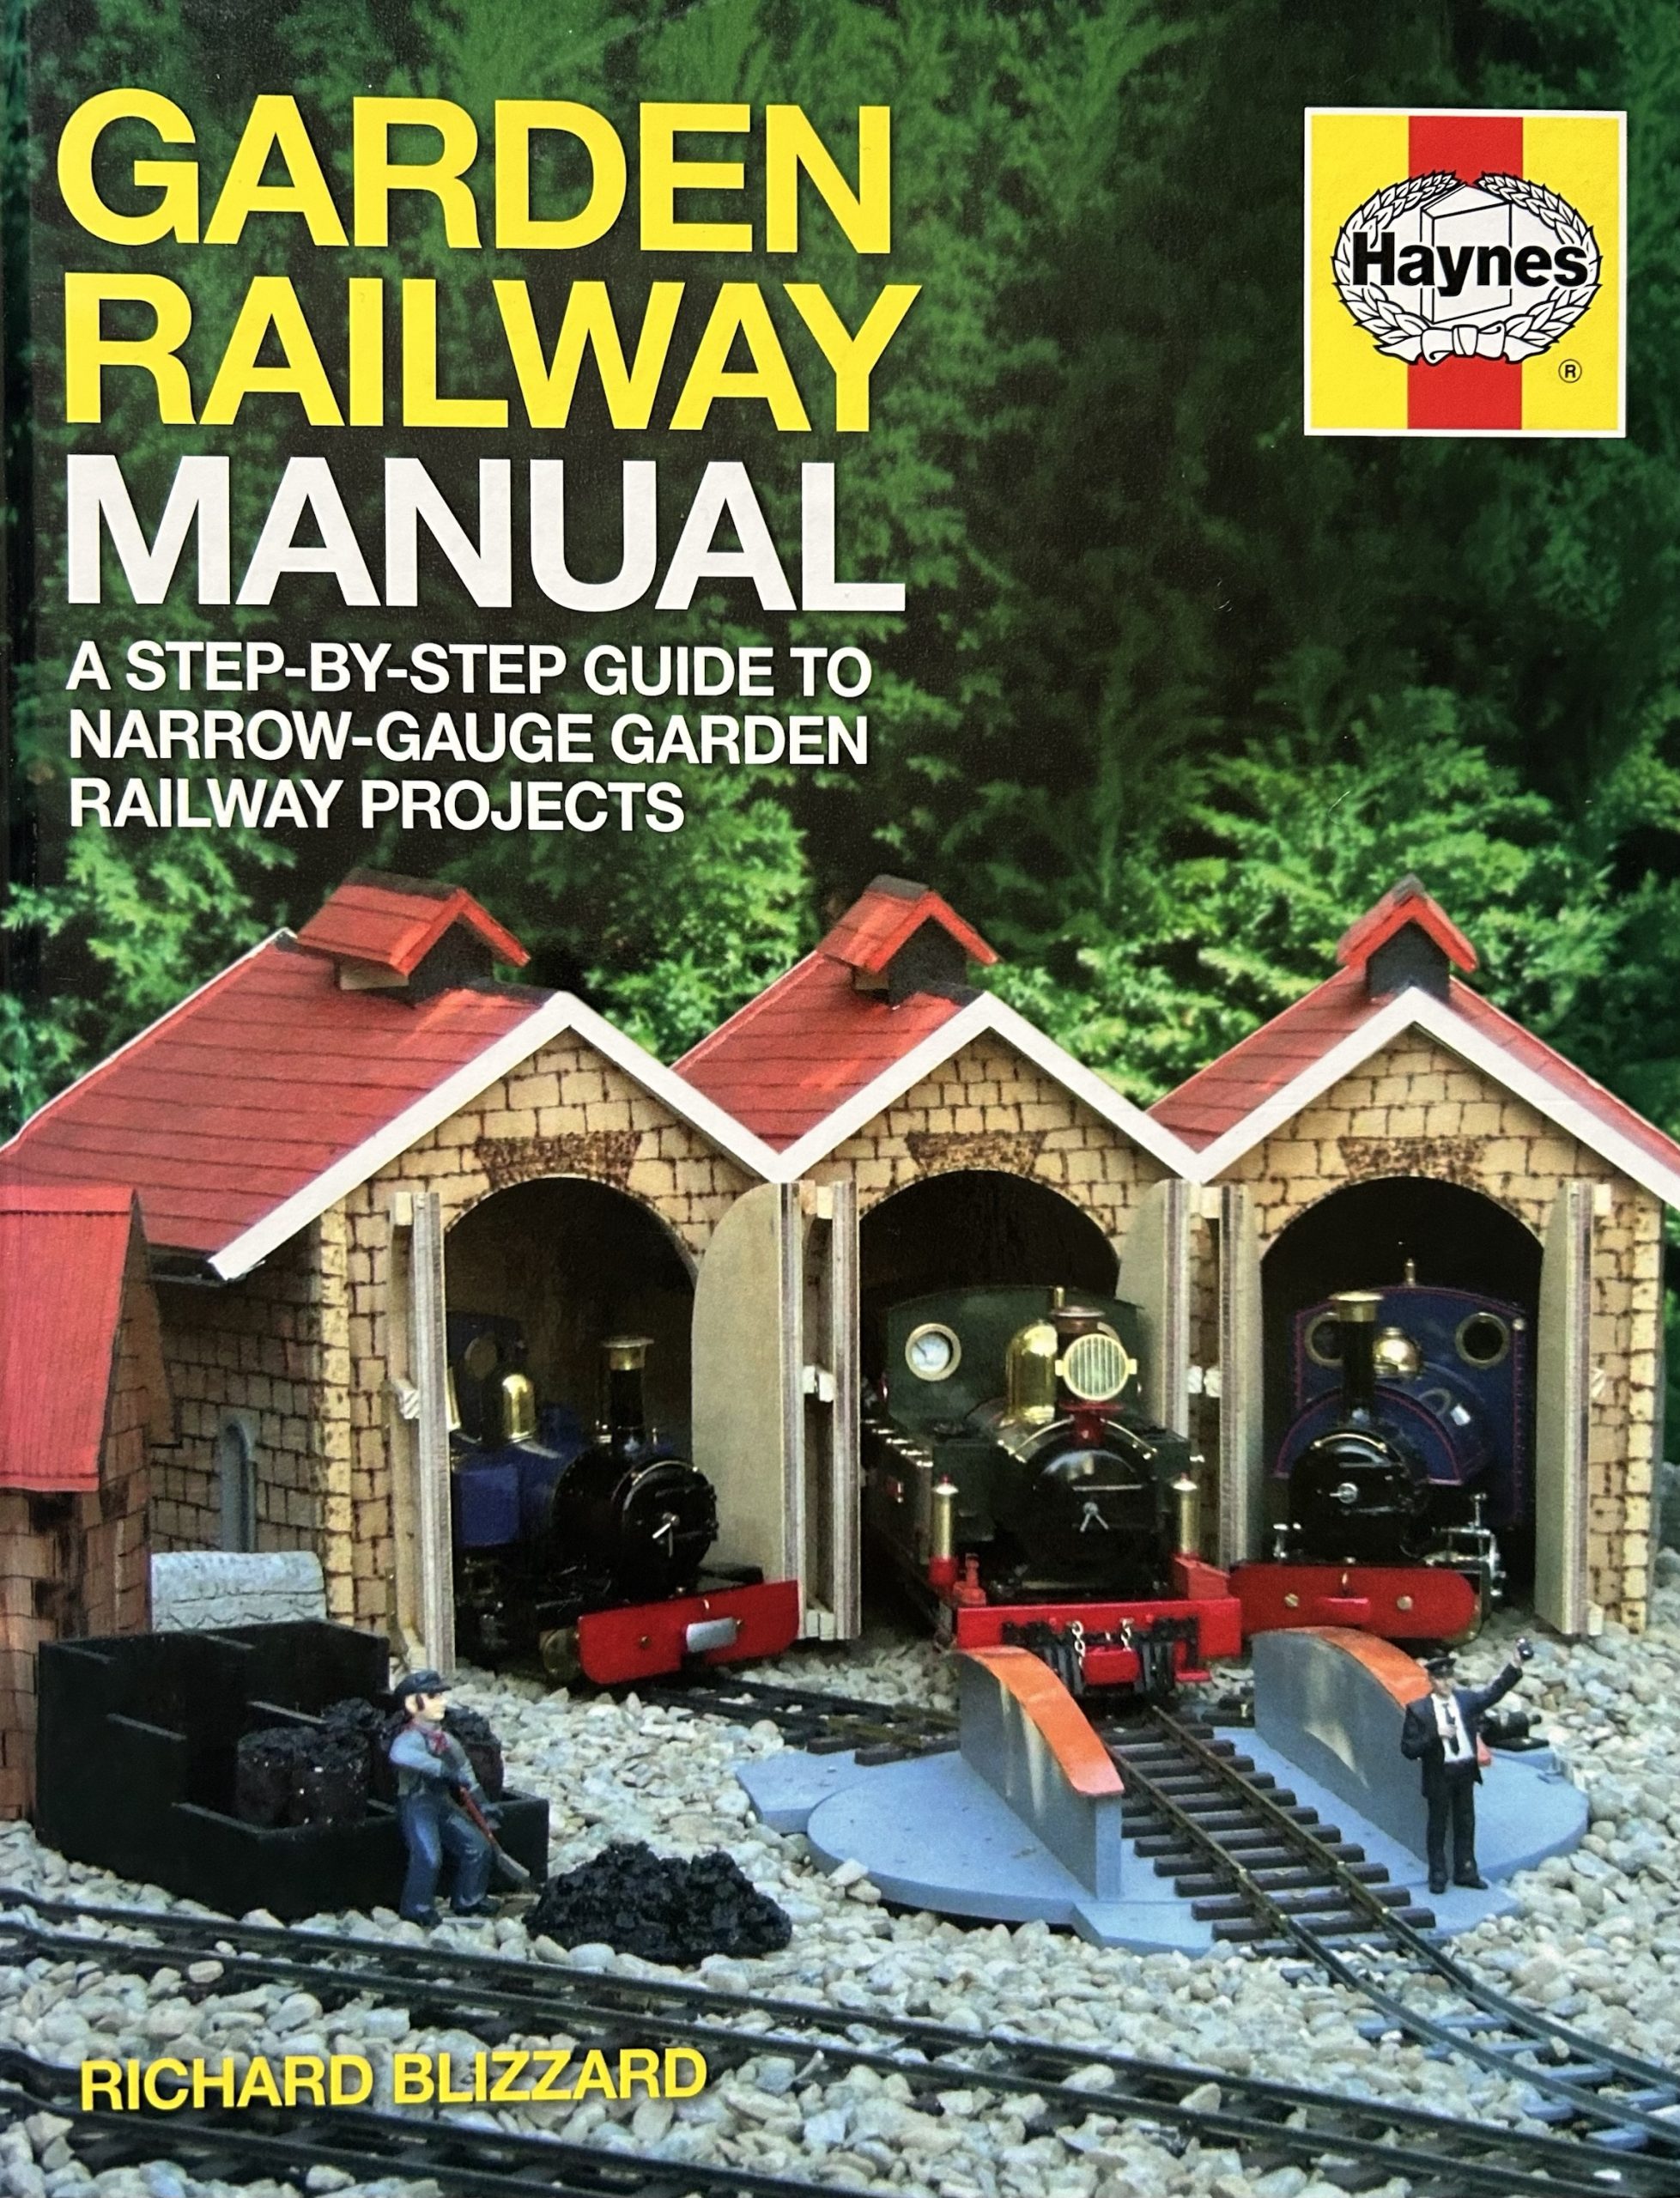 Garden Railway Manual: A Step-By-Step Guide to Narrow-Gauge Garden Railway Projects by Richard Blizzard